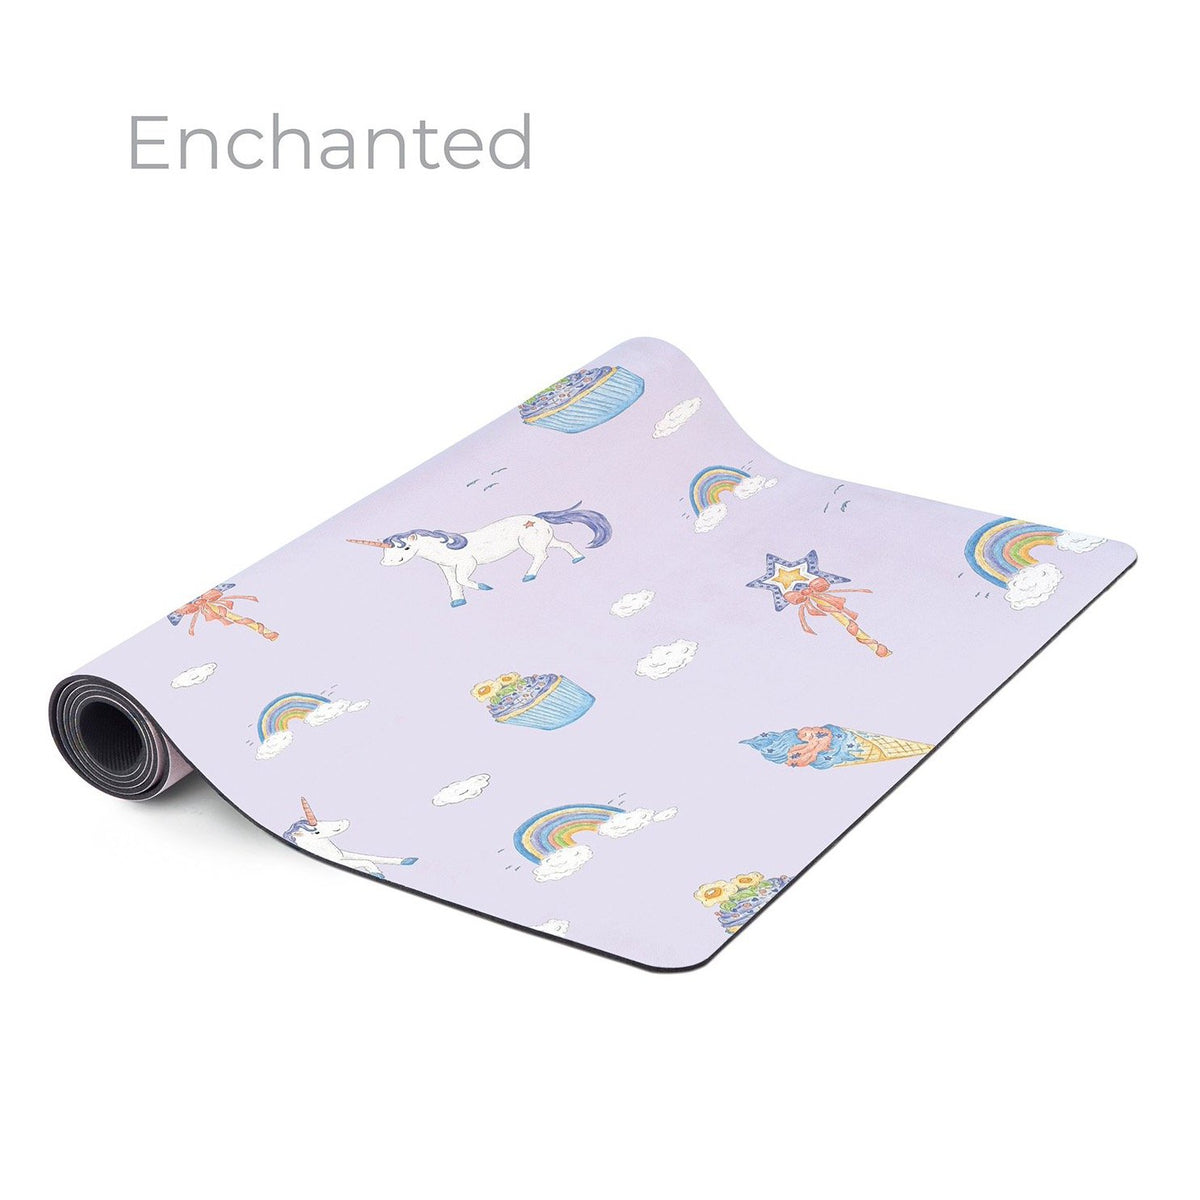 Kids Yoga Mat  These Yoga Mats For Kids Are the Perfect Size For